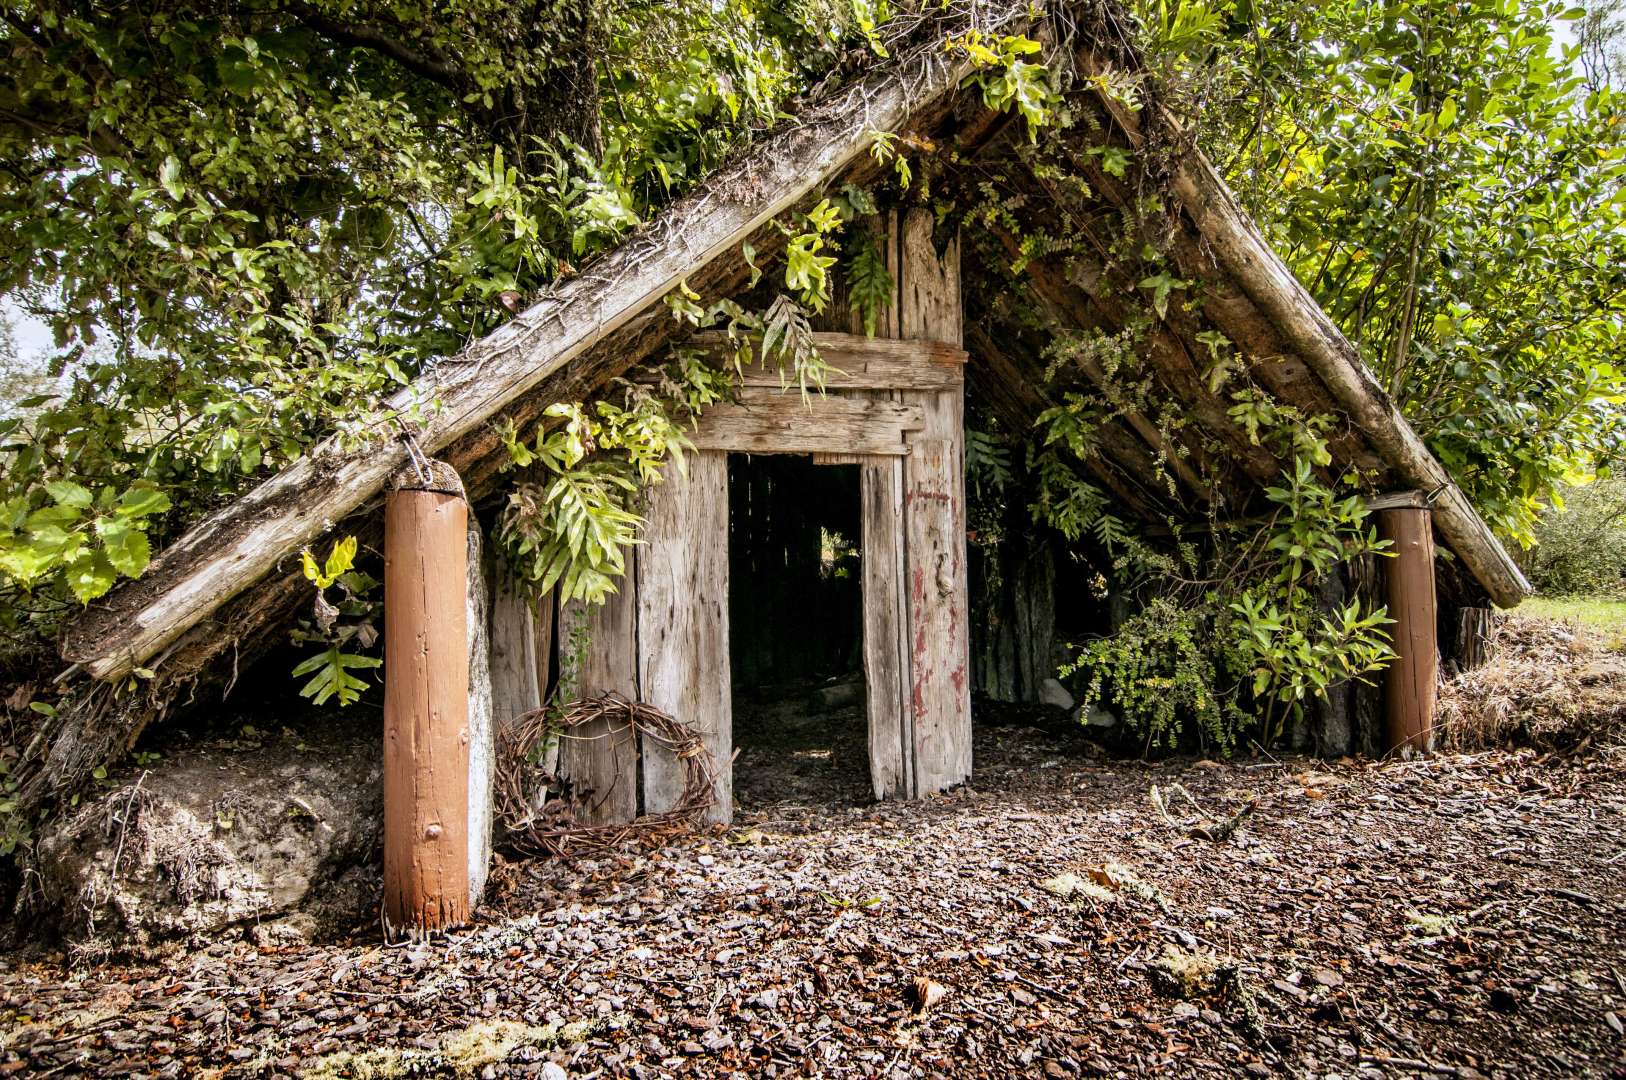 Buried Village is one of Rotorua�s iconic tourist destinations. Whare of Tuhoto